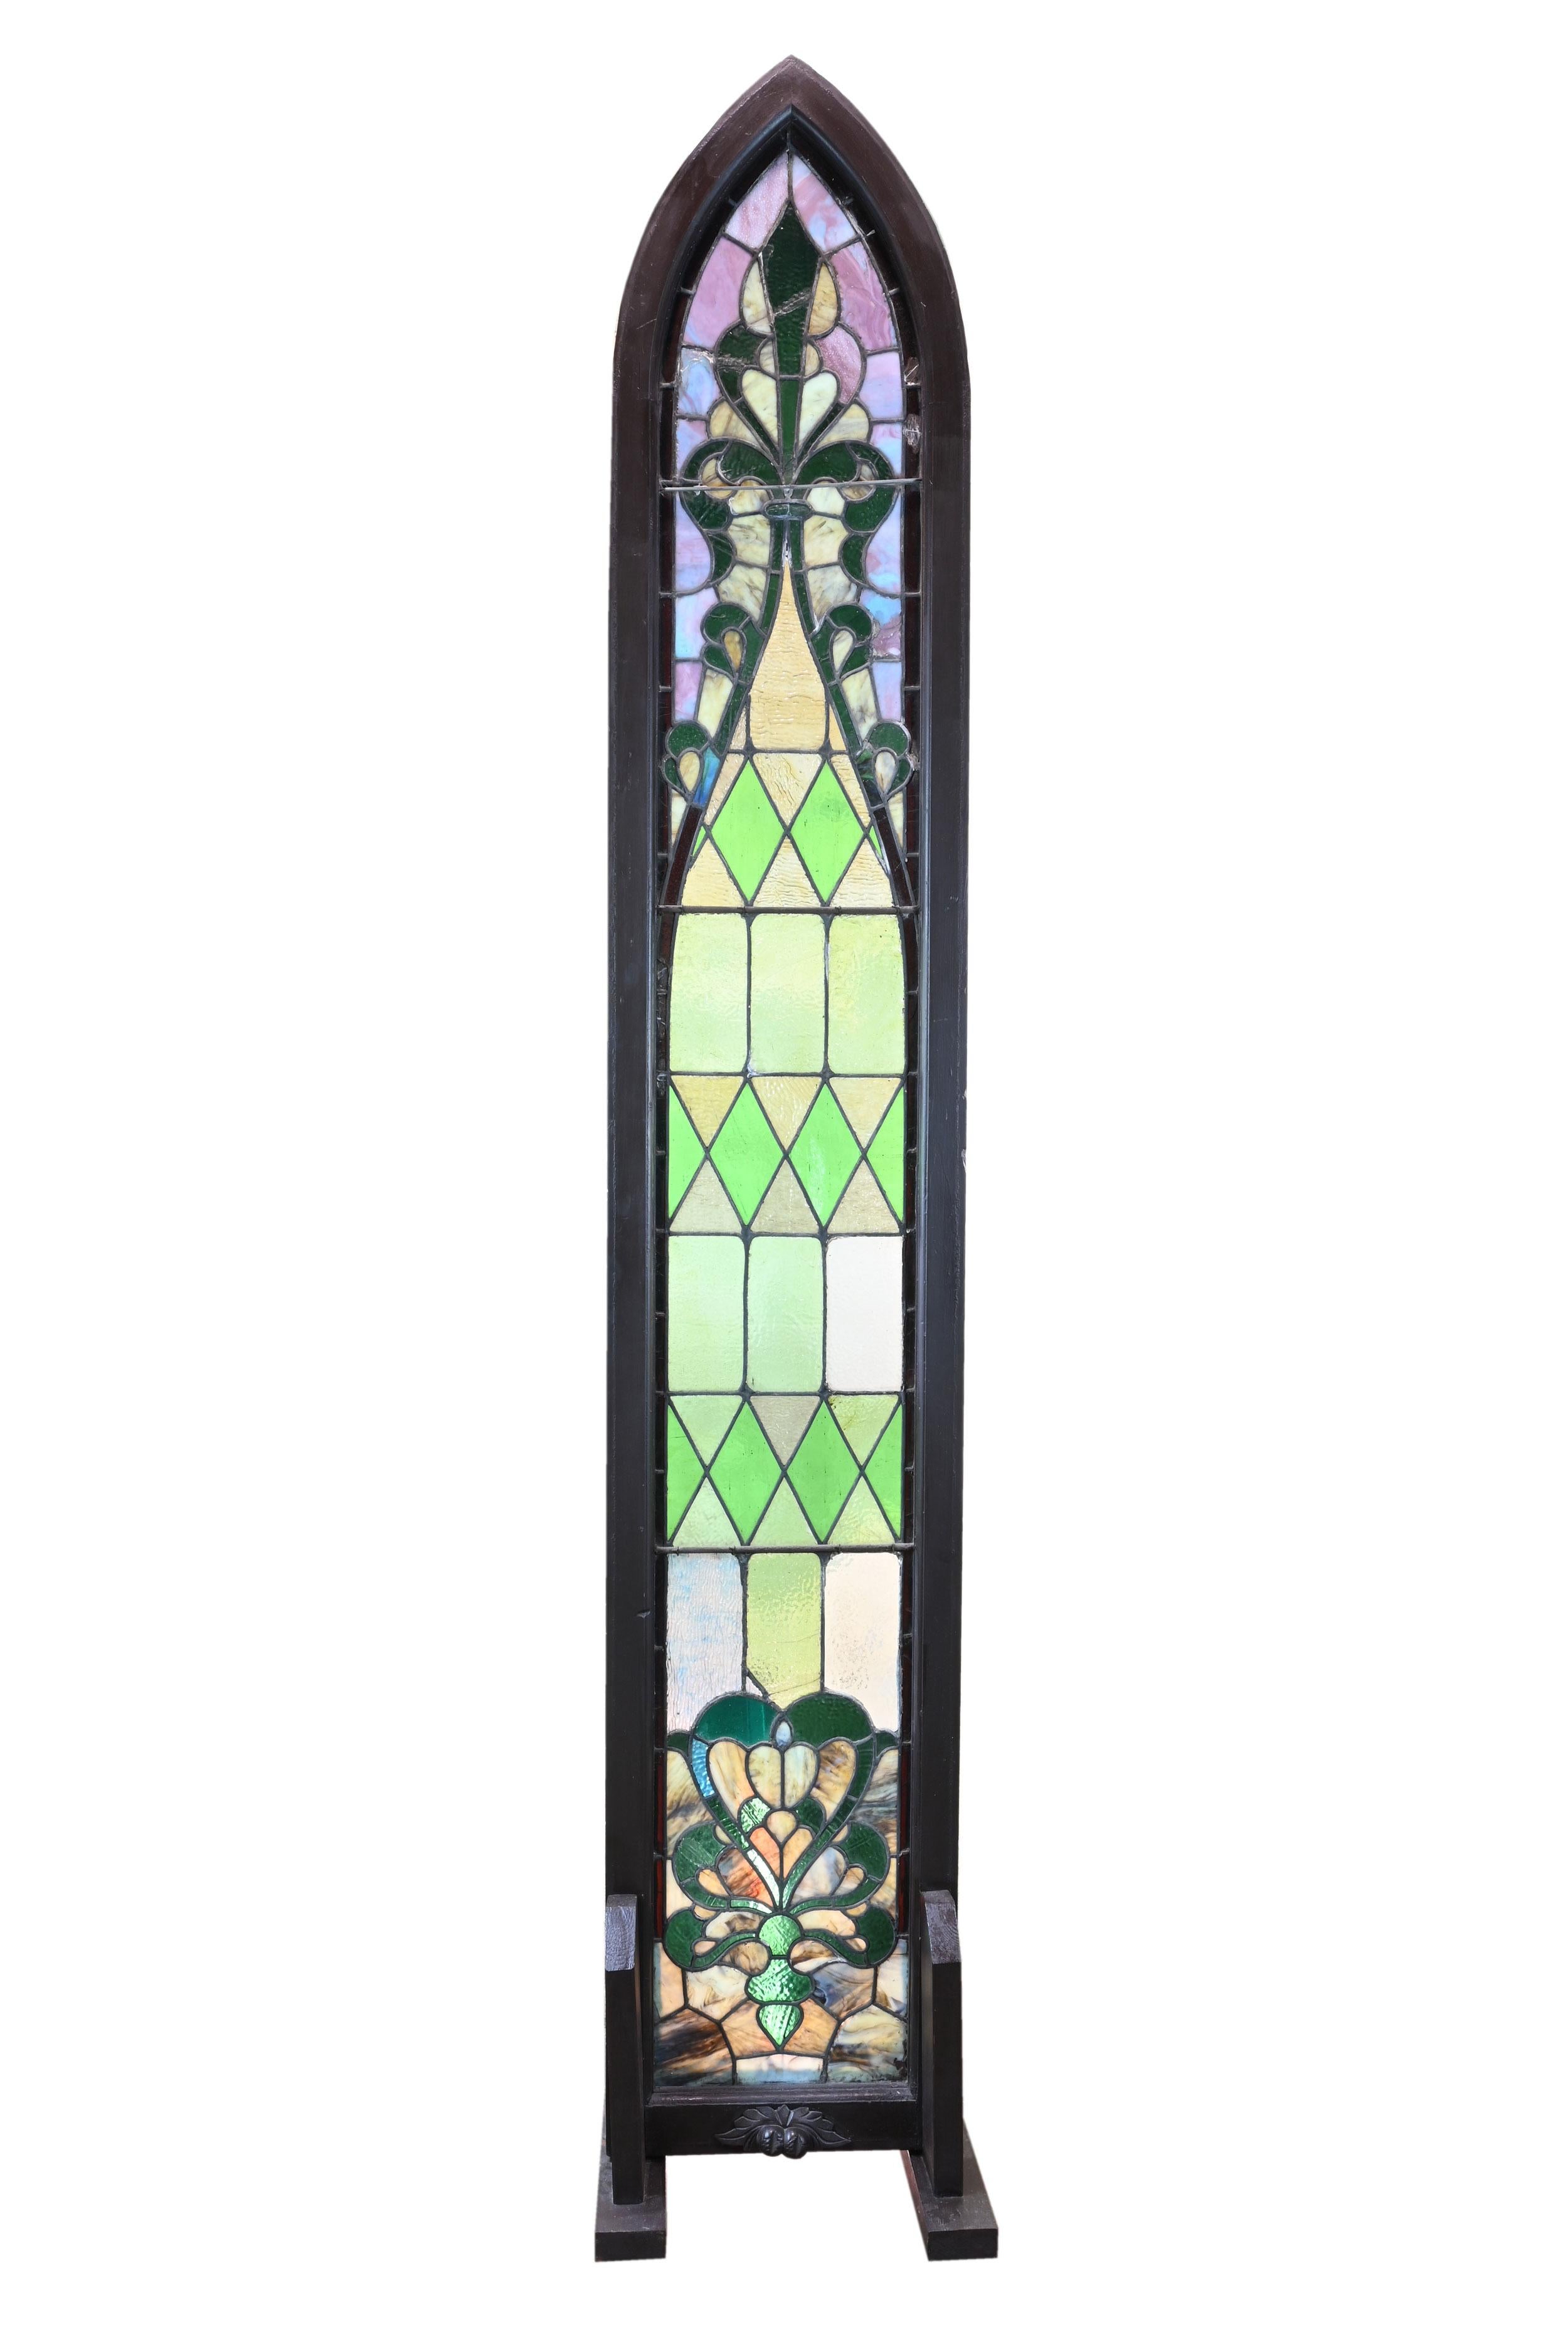 AA# 49950
 Circa: 1900
 Condition: Age consistent / good
 Material: Wood frame, slag and stained glass
 Finish: Frame painted along with feet to match
 Country of Origin: U.S.A.
 Dimensions: 17 7/8” wide x 2 1/8” thick frame x 104” height
